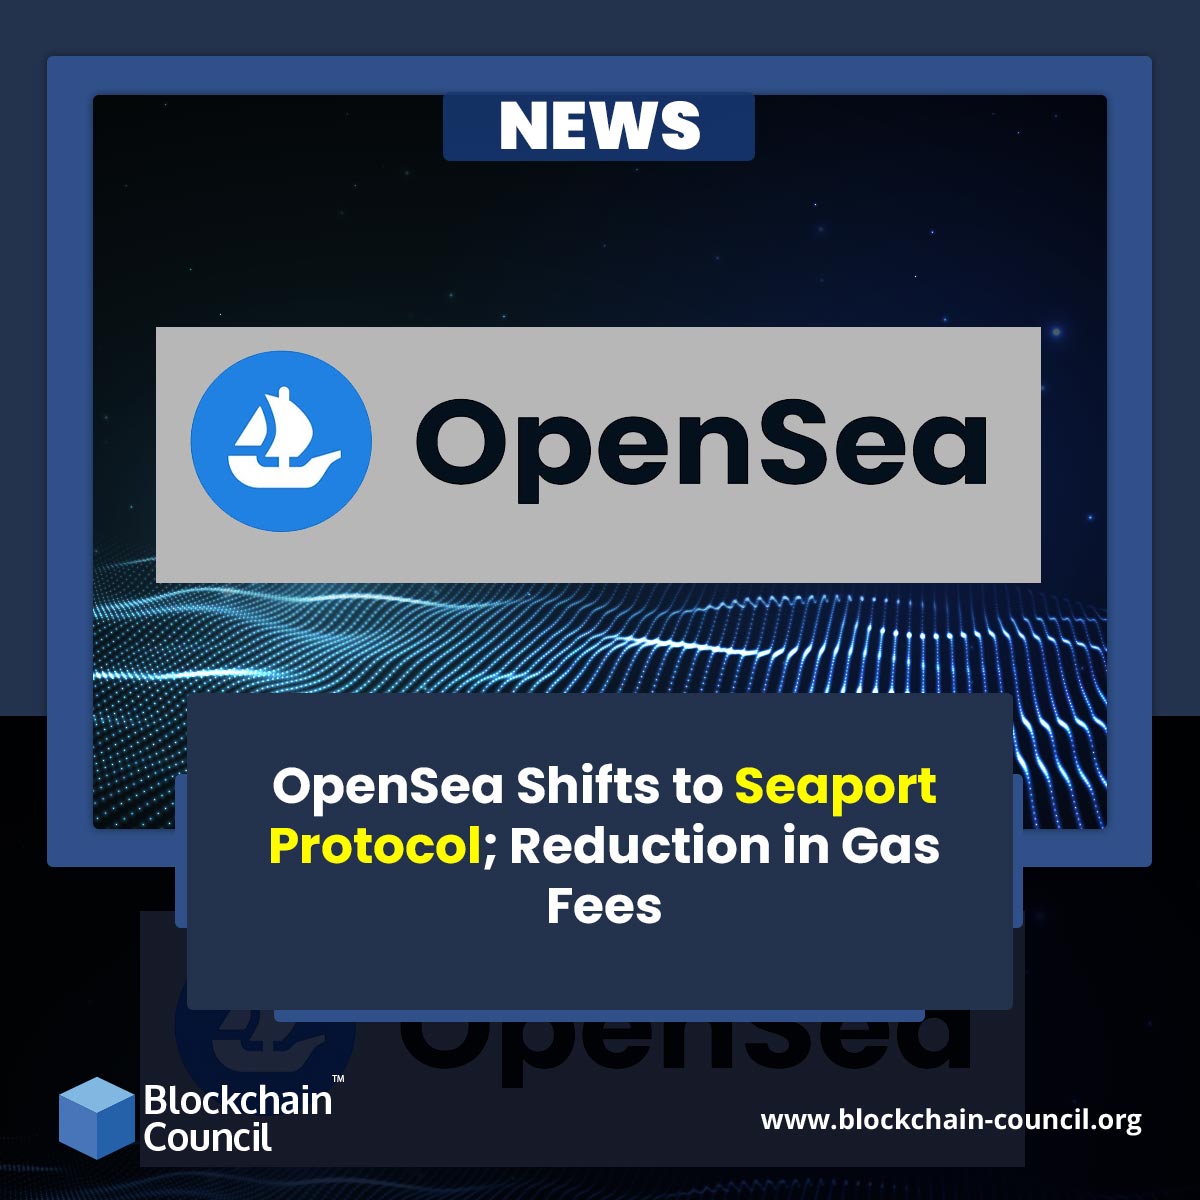 OpenSea Shifts to Seaport Protocol; Reduction in Gas Fees